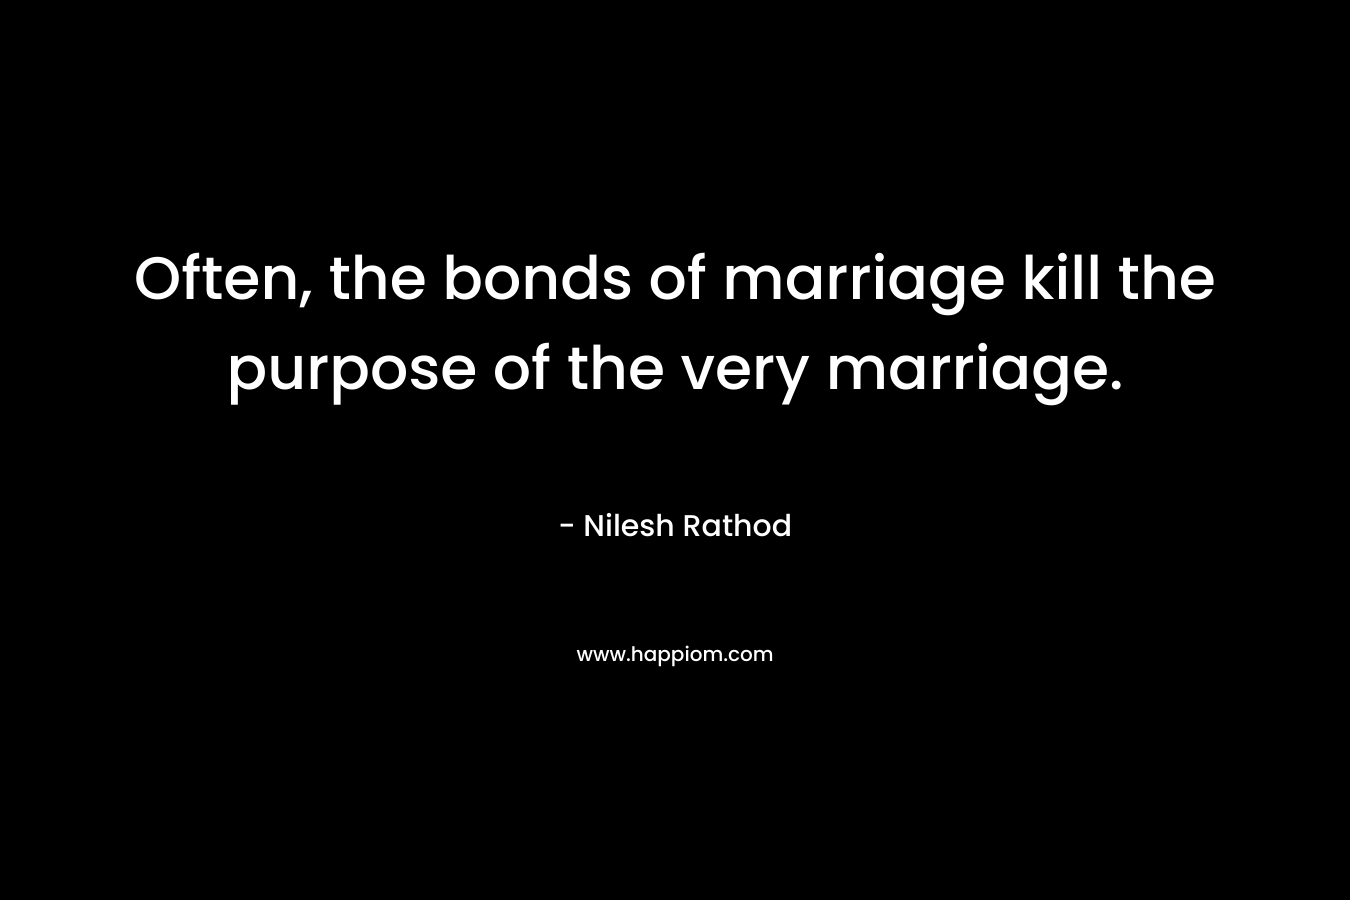 Often, the bonds of marriage kill the purpose of the very marriage.